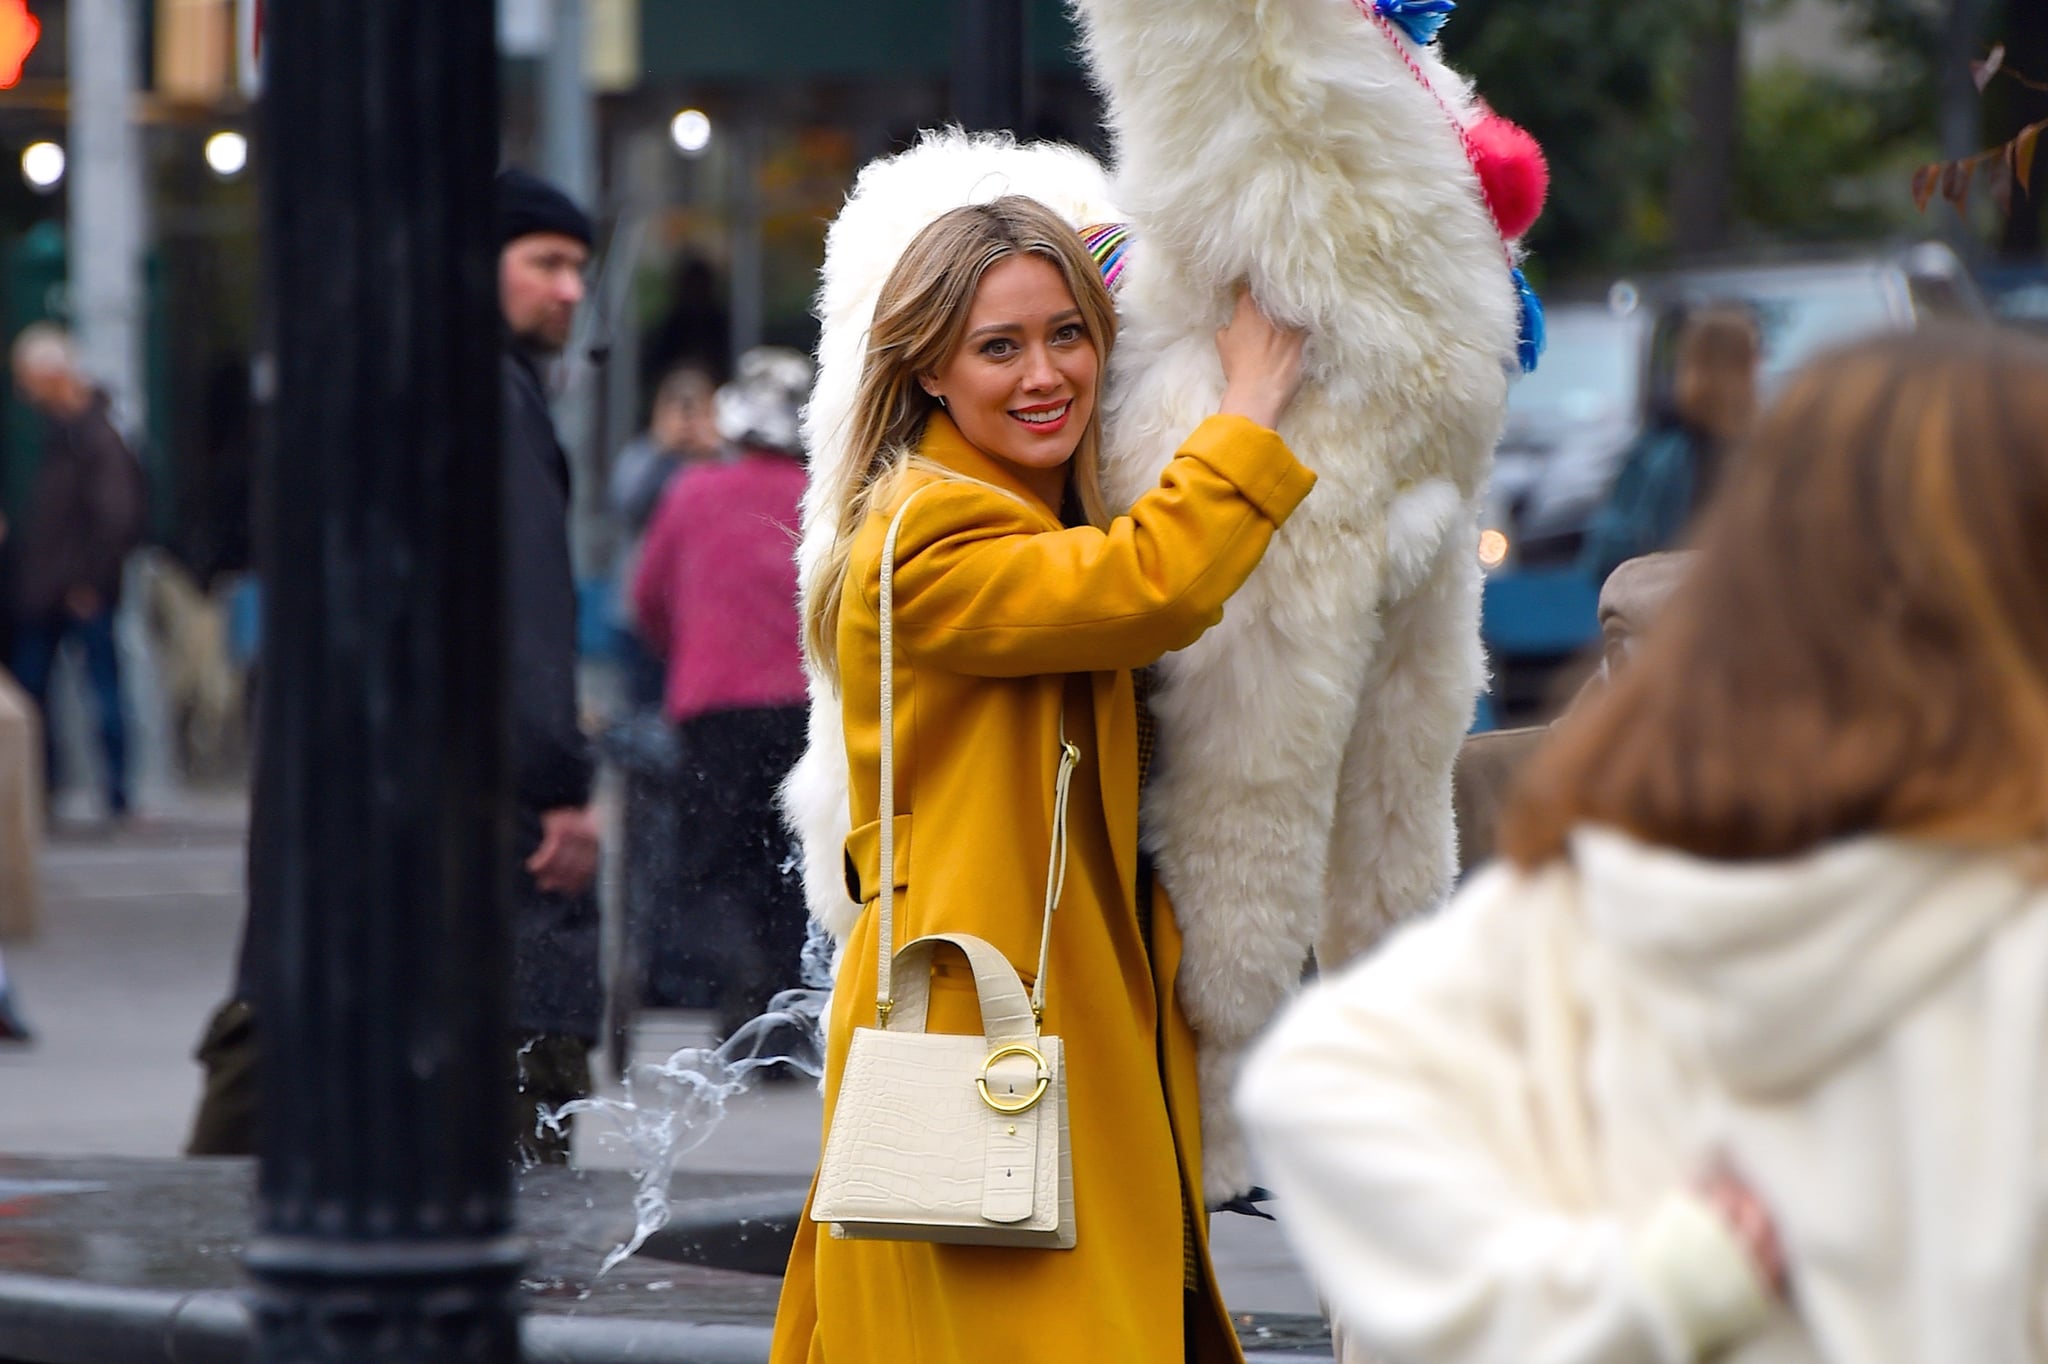 NEW YORK, NY - OCTOBER 29:  Hilary Duff seen with a stuffed animal llama at a film set at Washington Square Park on  October 29, 2019 in New York City.  (Photo by Robert Kamau/GC Images)